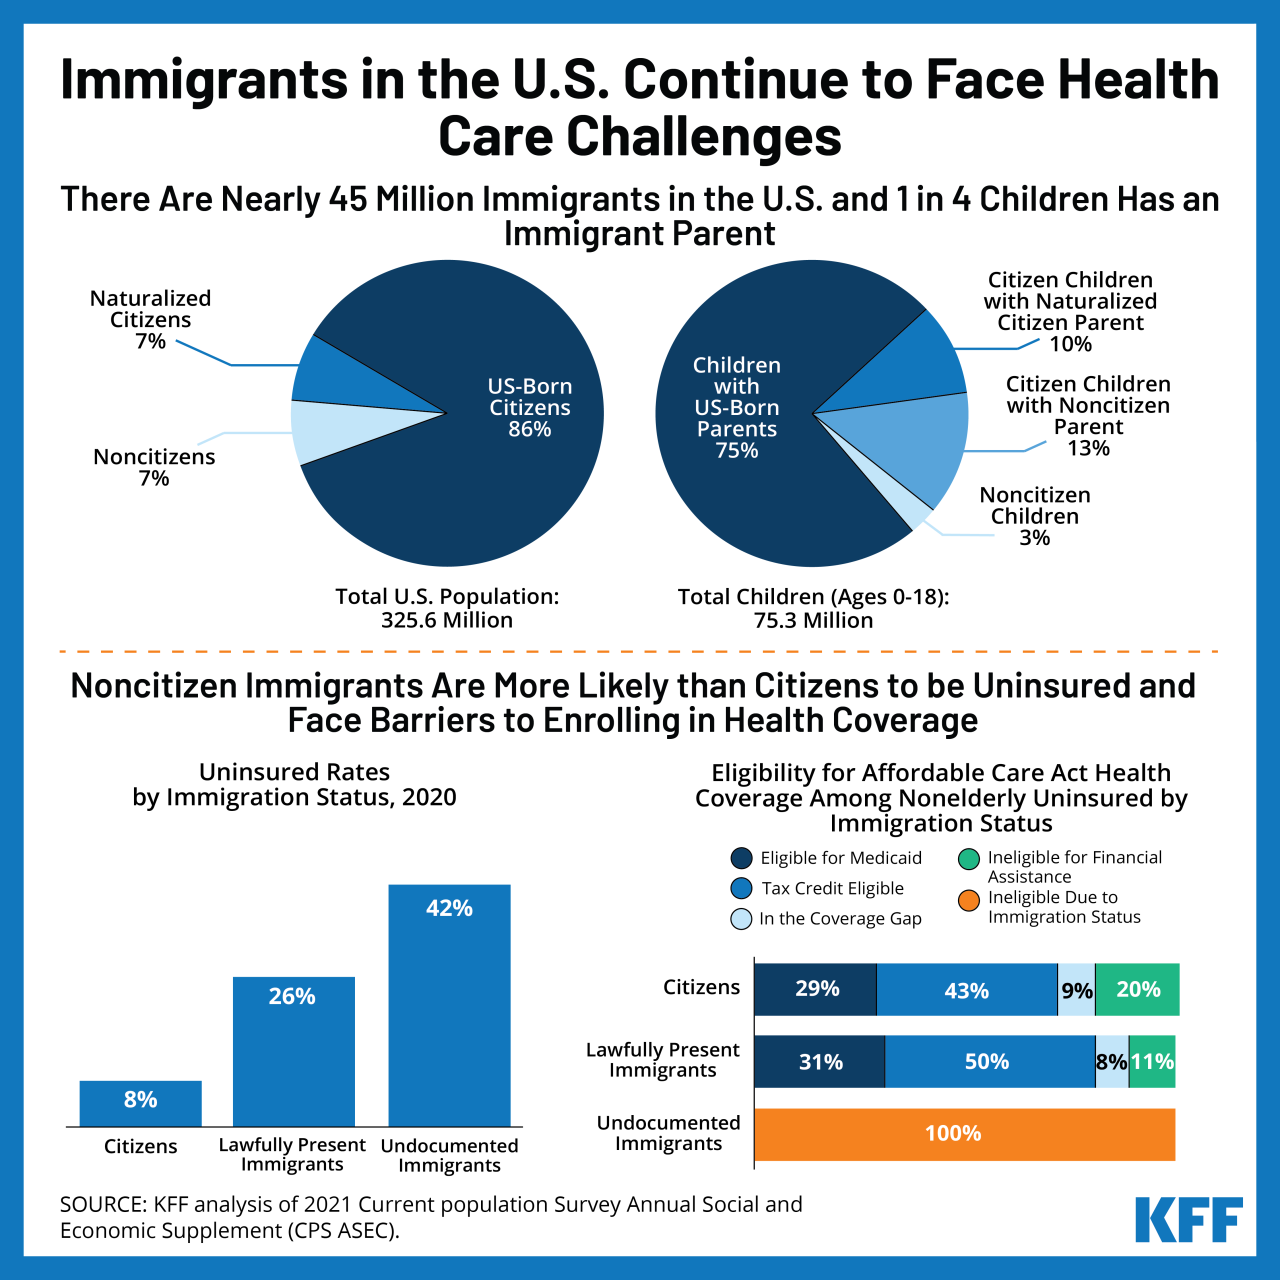 Immigration and Healthcare: Access and Challenges